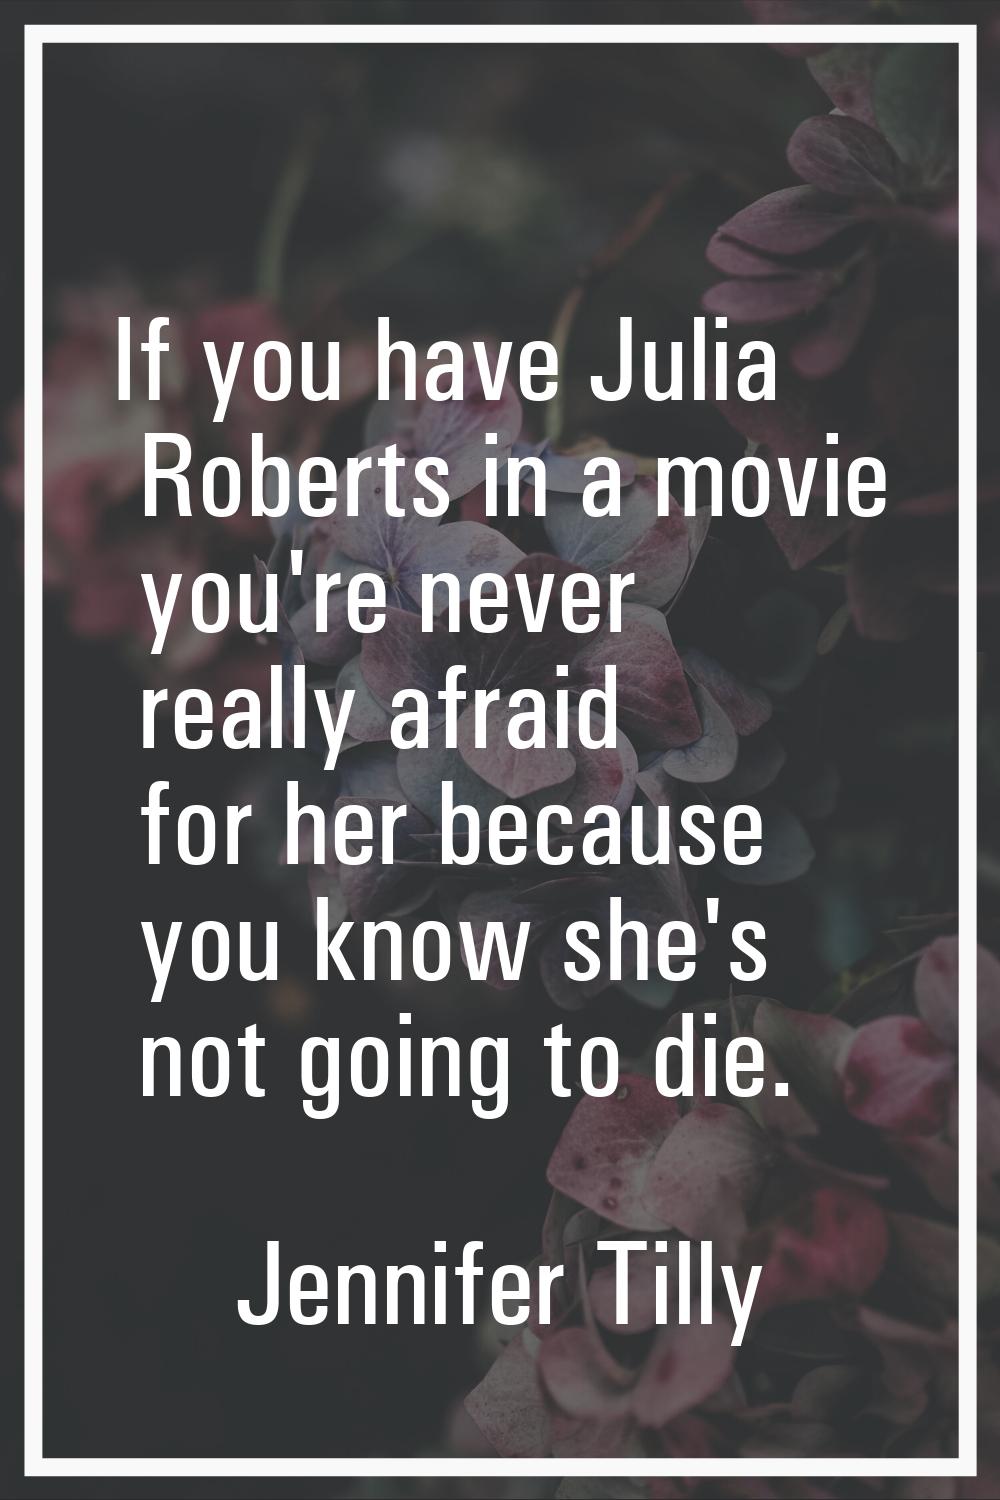 If you have Julia Roberts in a movie you're never really afraid for her because you know she's not 